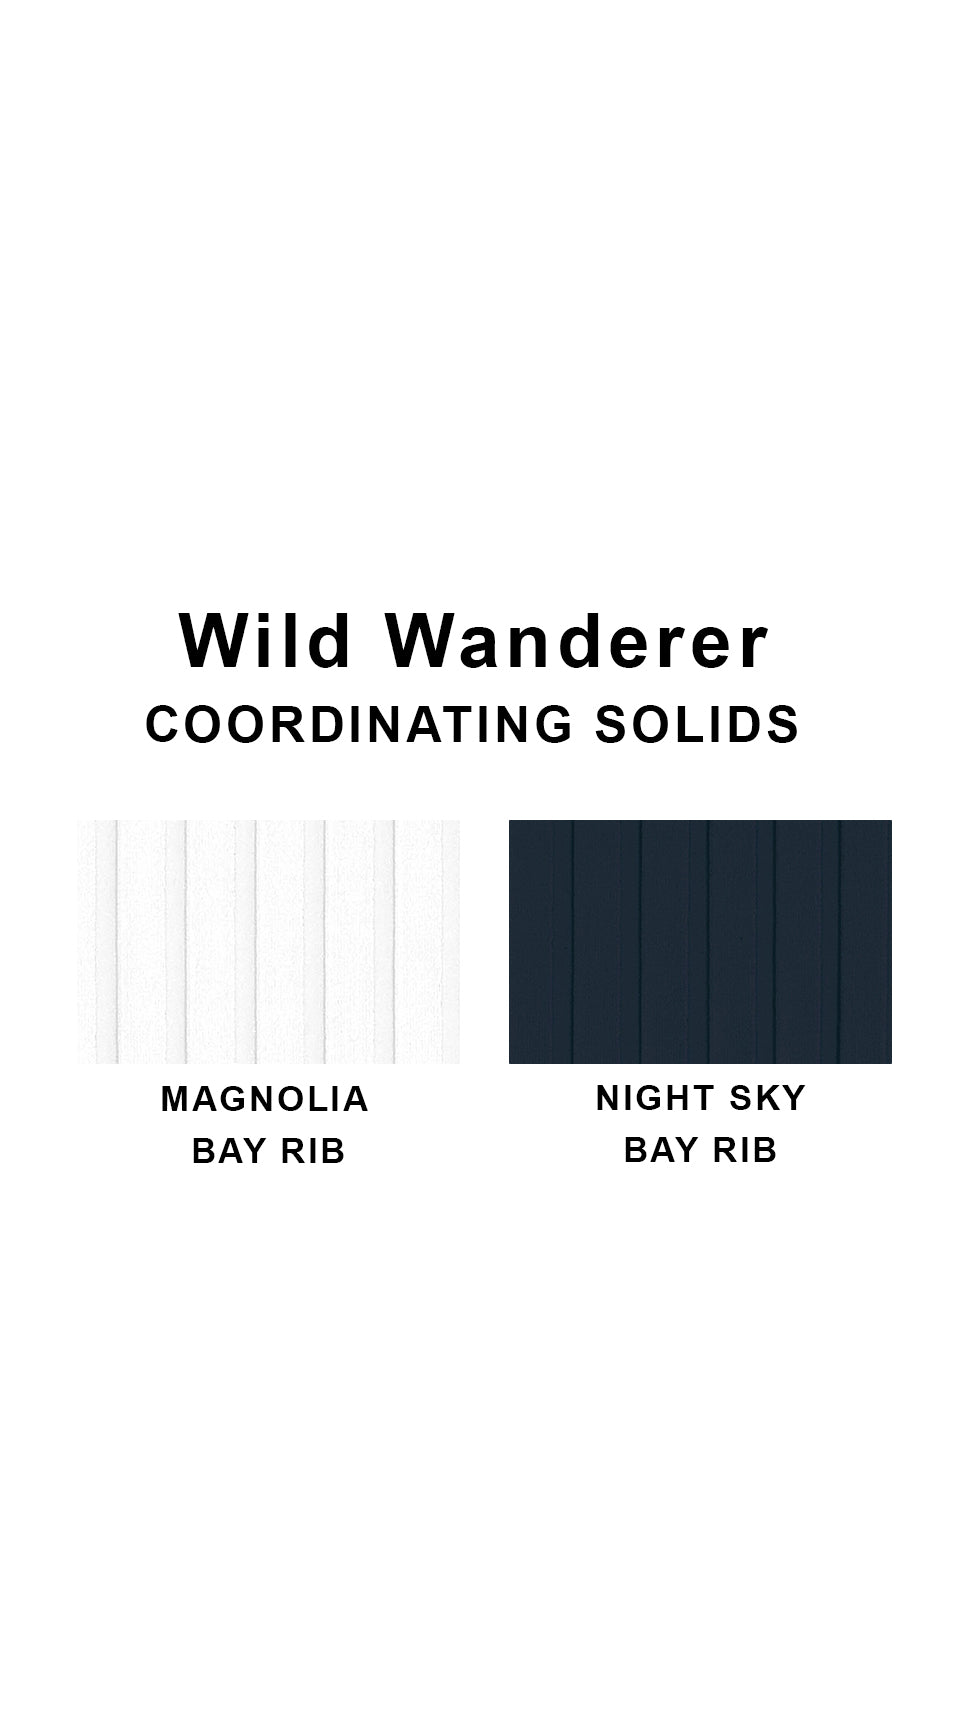 Coordinating solids chart for Wild Wanderer swimsuit print: Magnolia and Night Sky Bay Rib